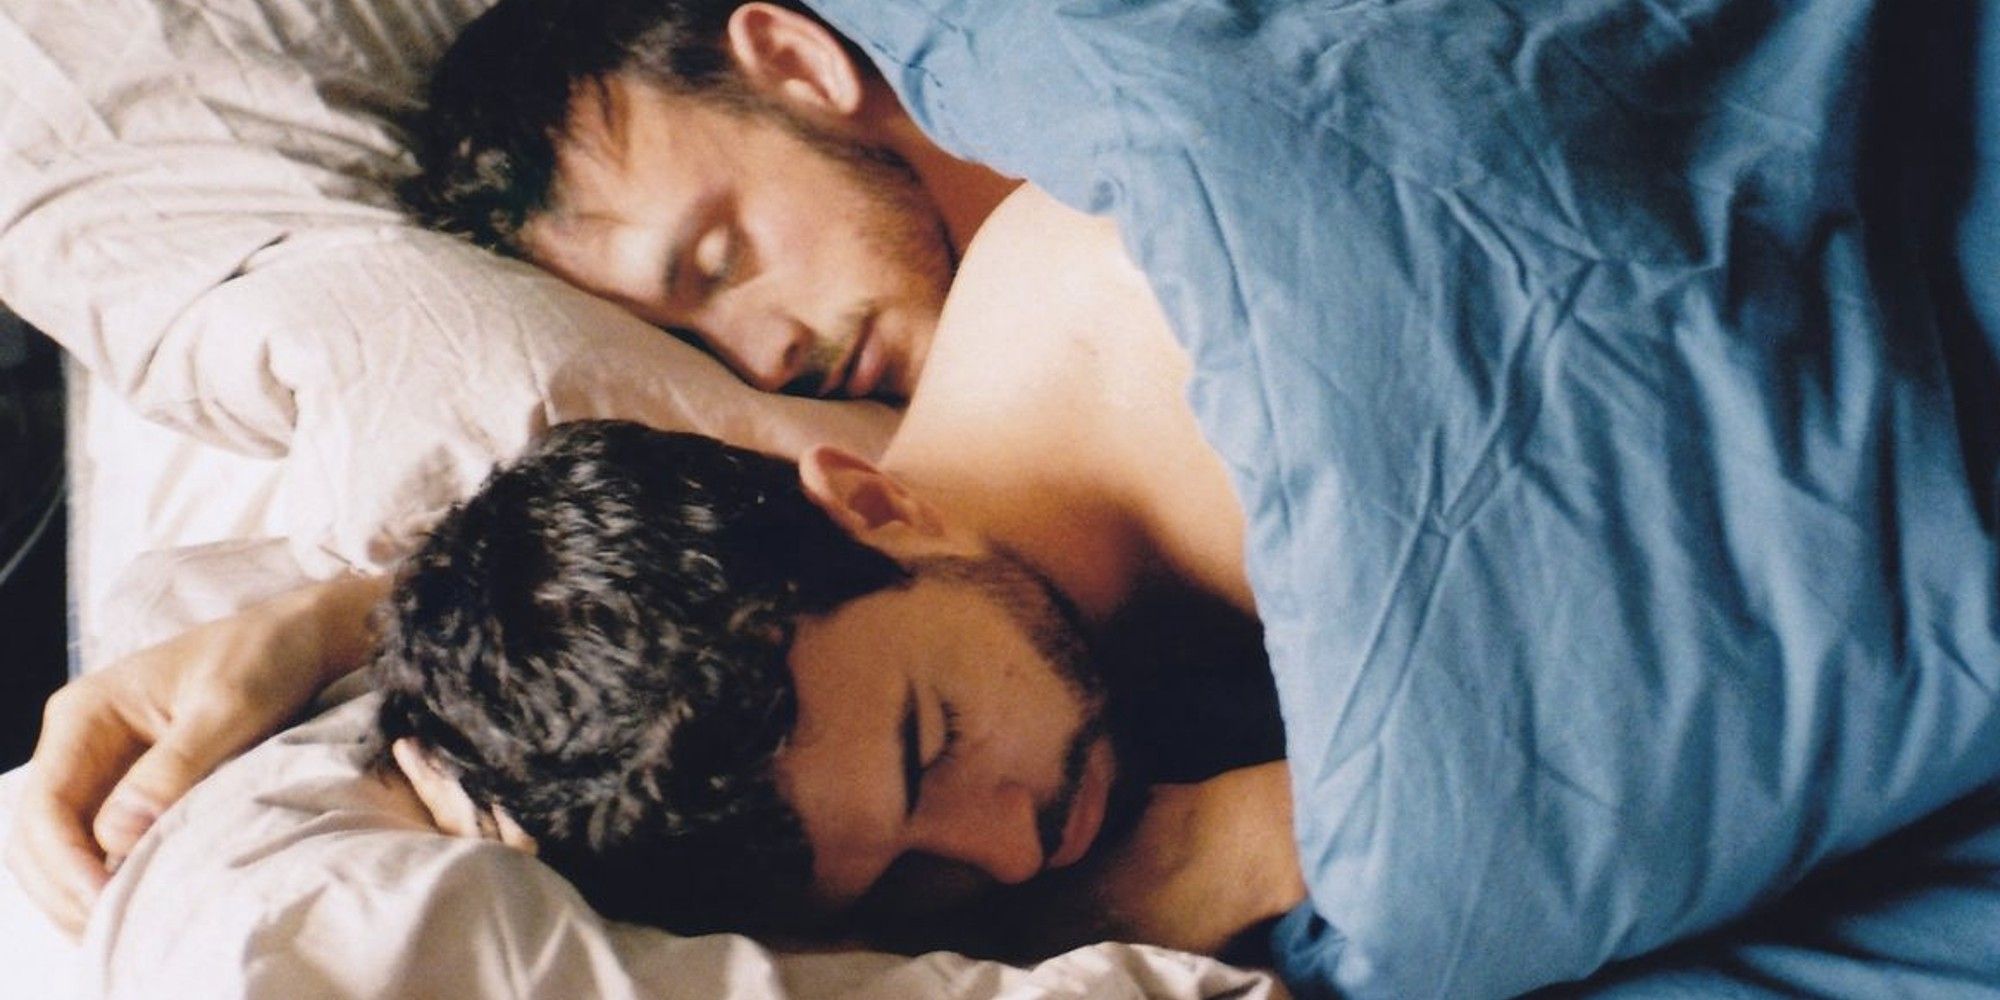 Tom Cullen and Alex New in bed together sleeping in 'Weekend'